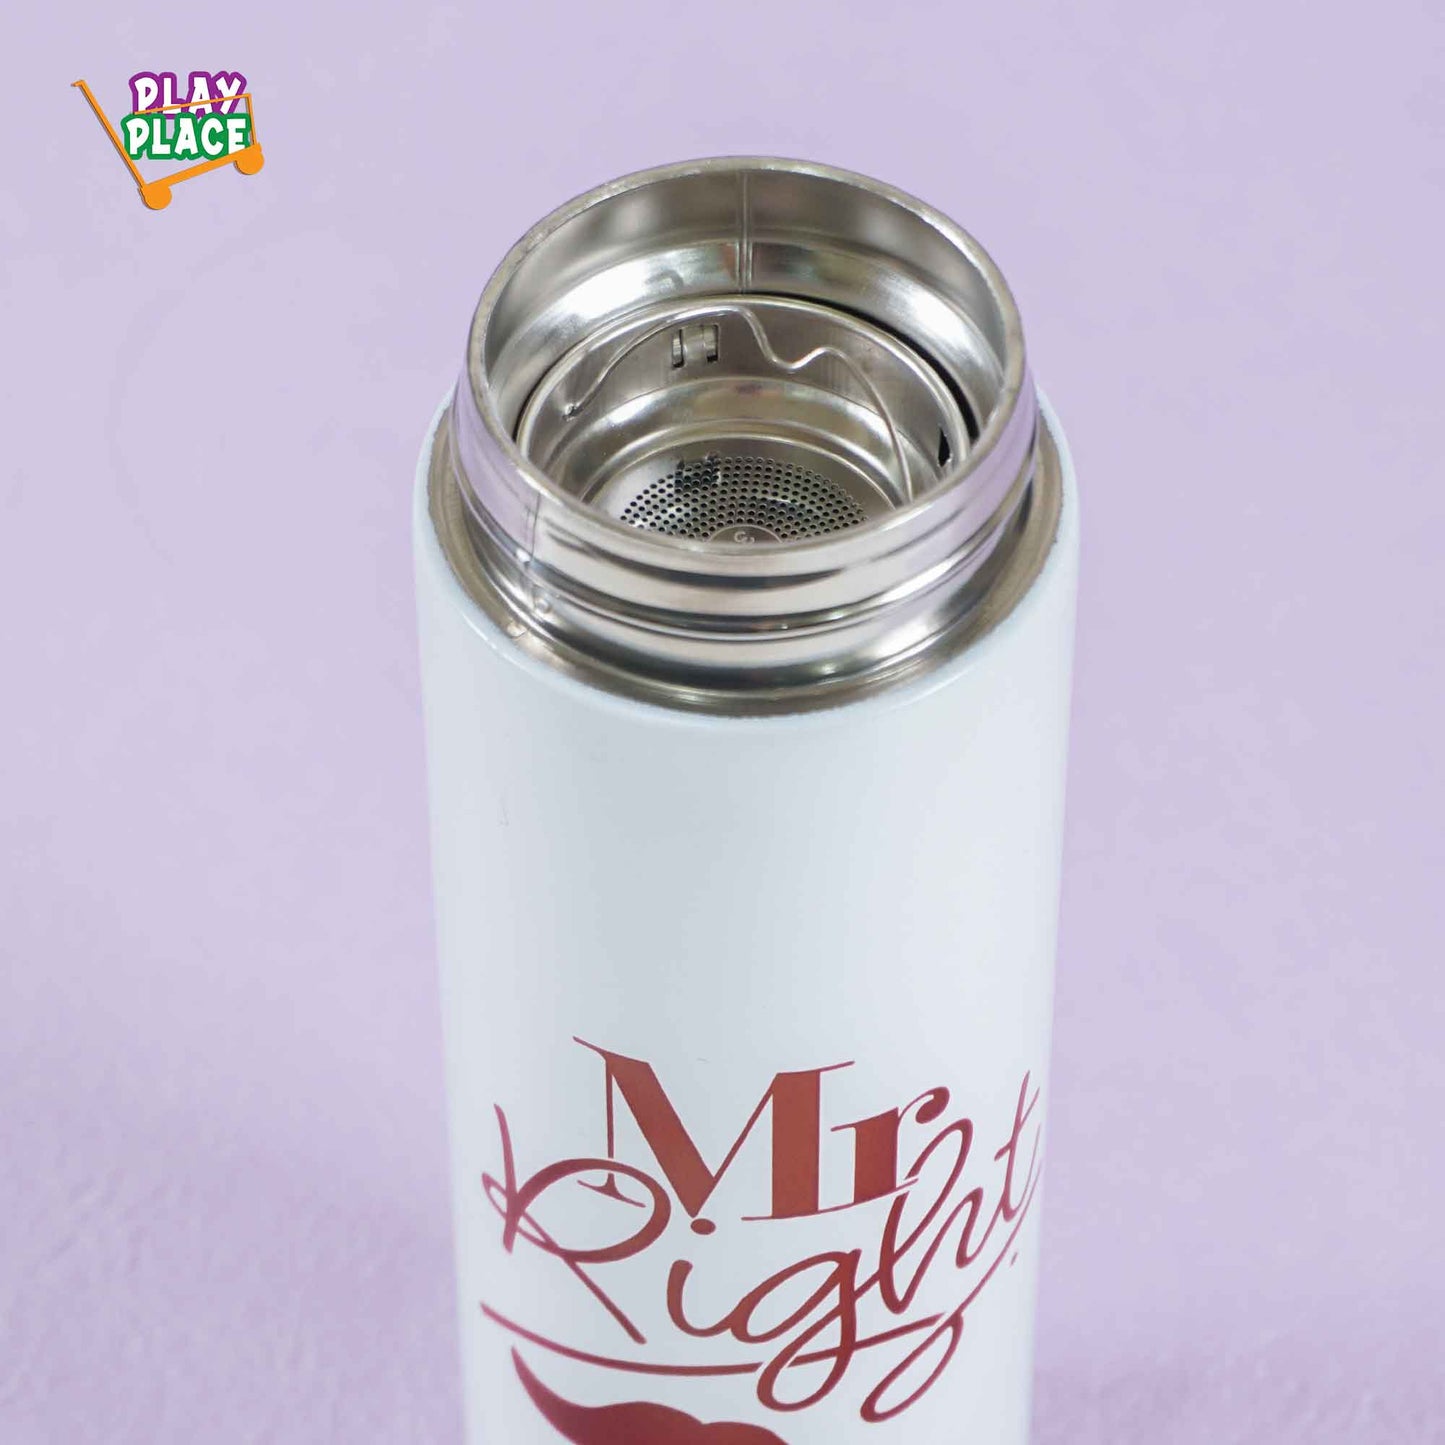 Mr.Right Aluminium Water Bottle with temperature display